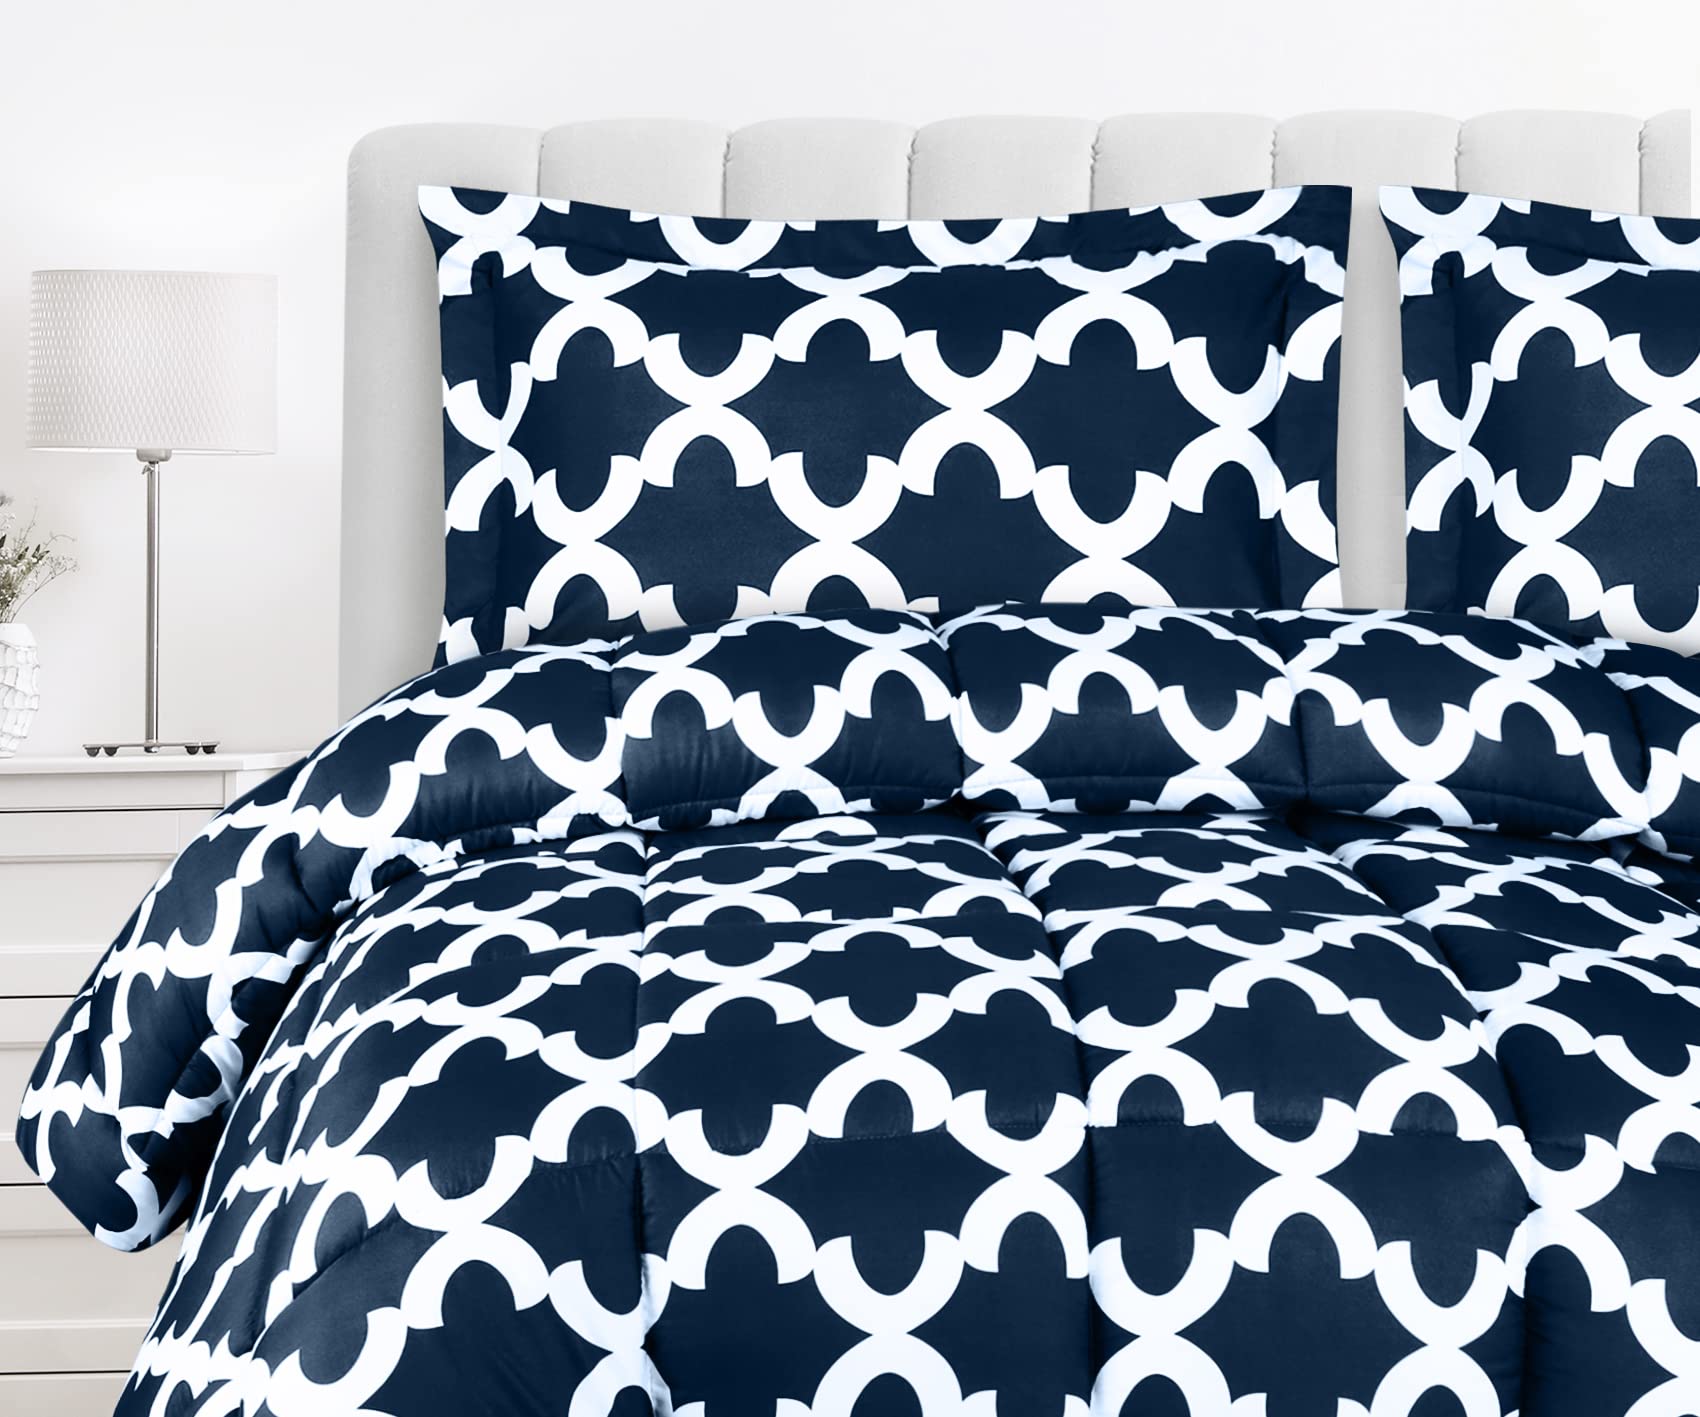 Book Cover Utopia Bedding Printed Comforter Set (King/Cal King, Navy) with 2 Pillow Shams - Luxurious Brushed Microfiber - Down Alternative Comforter - Soft and Comfortable - Machine Washable